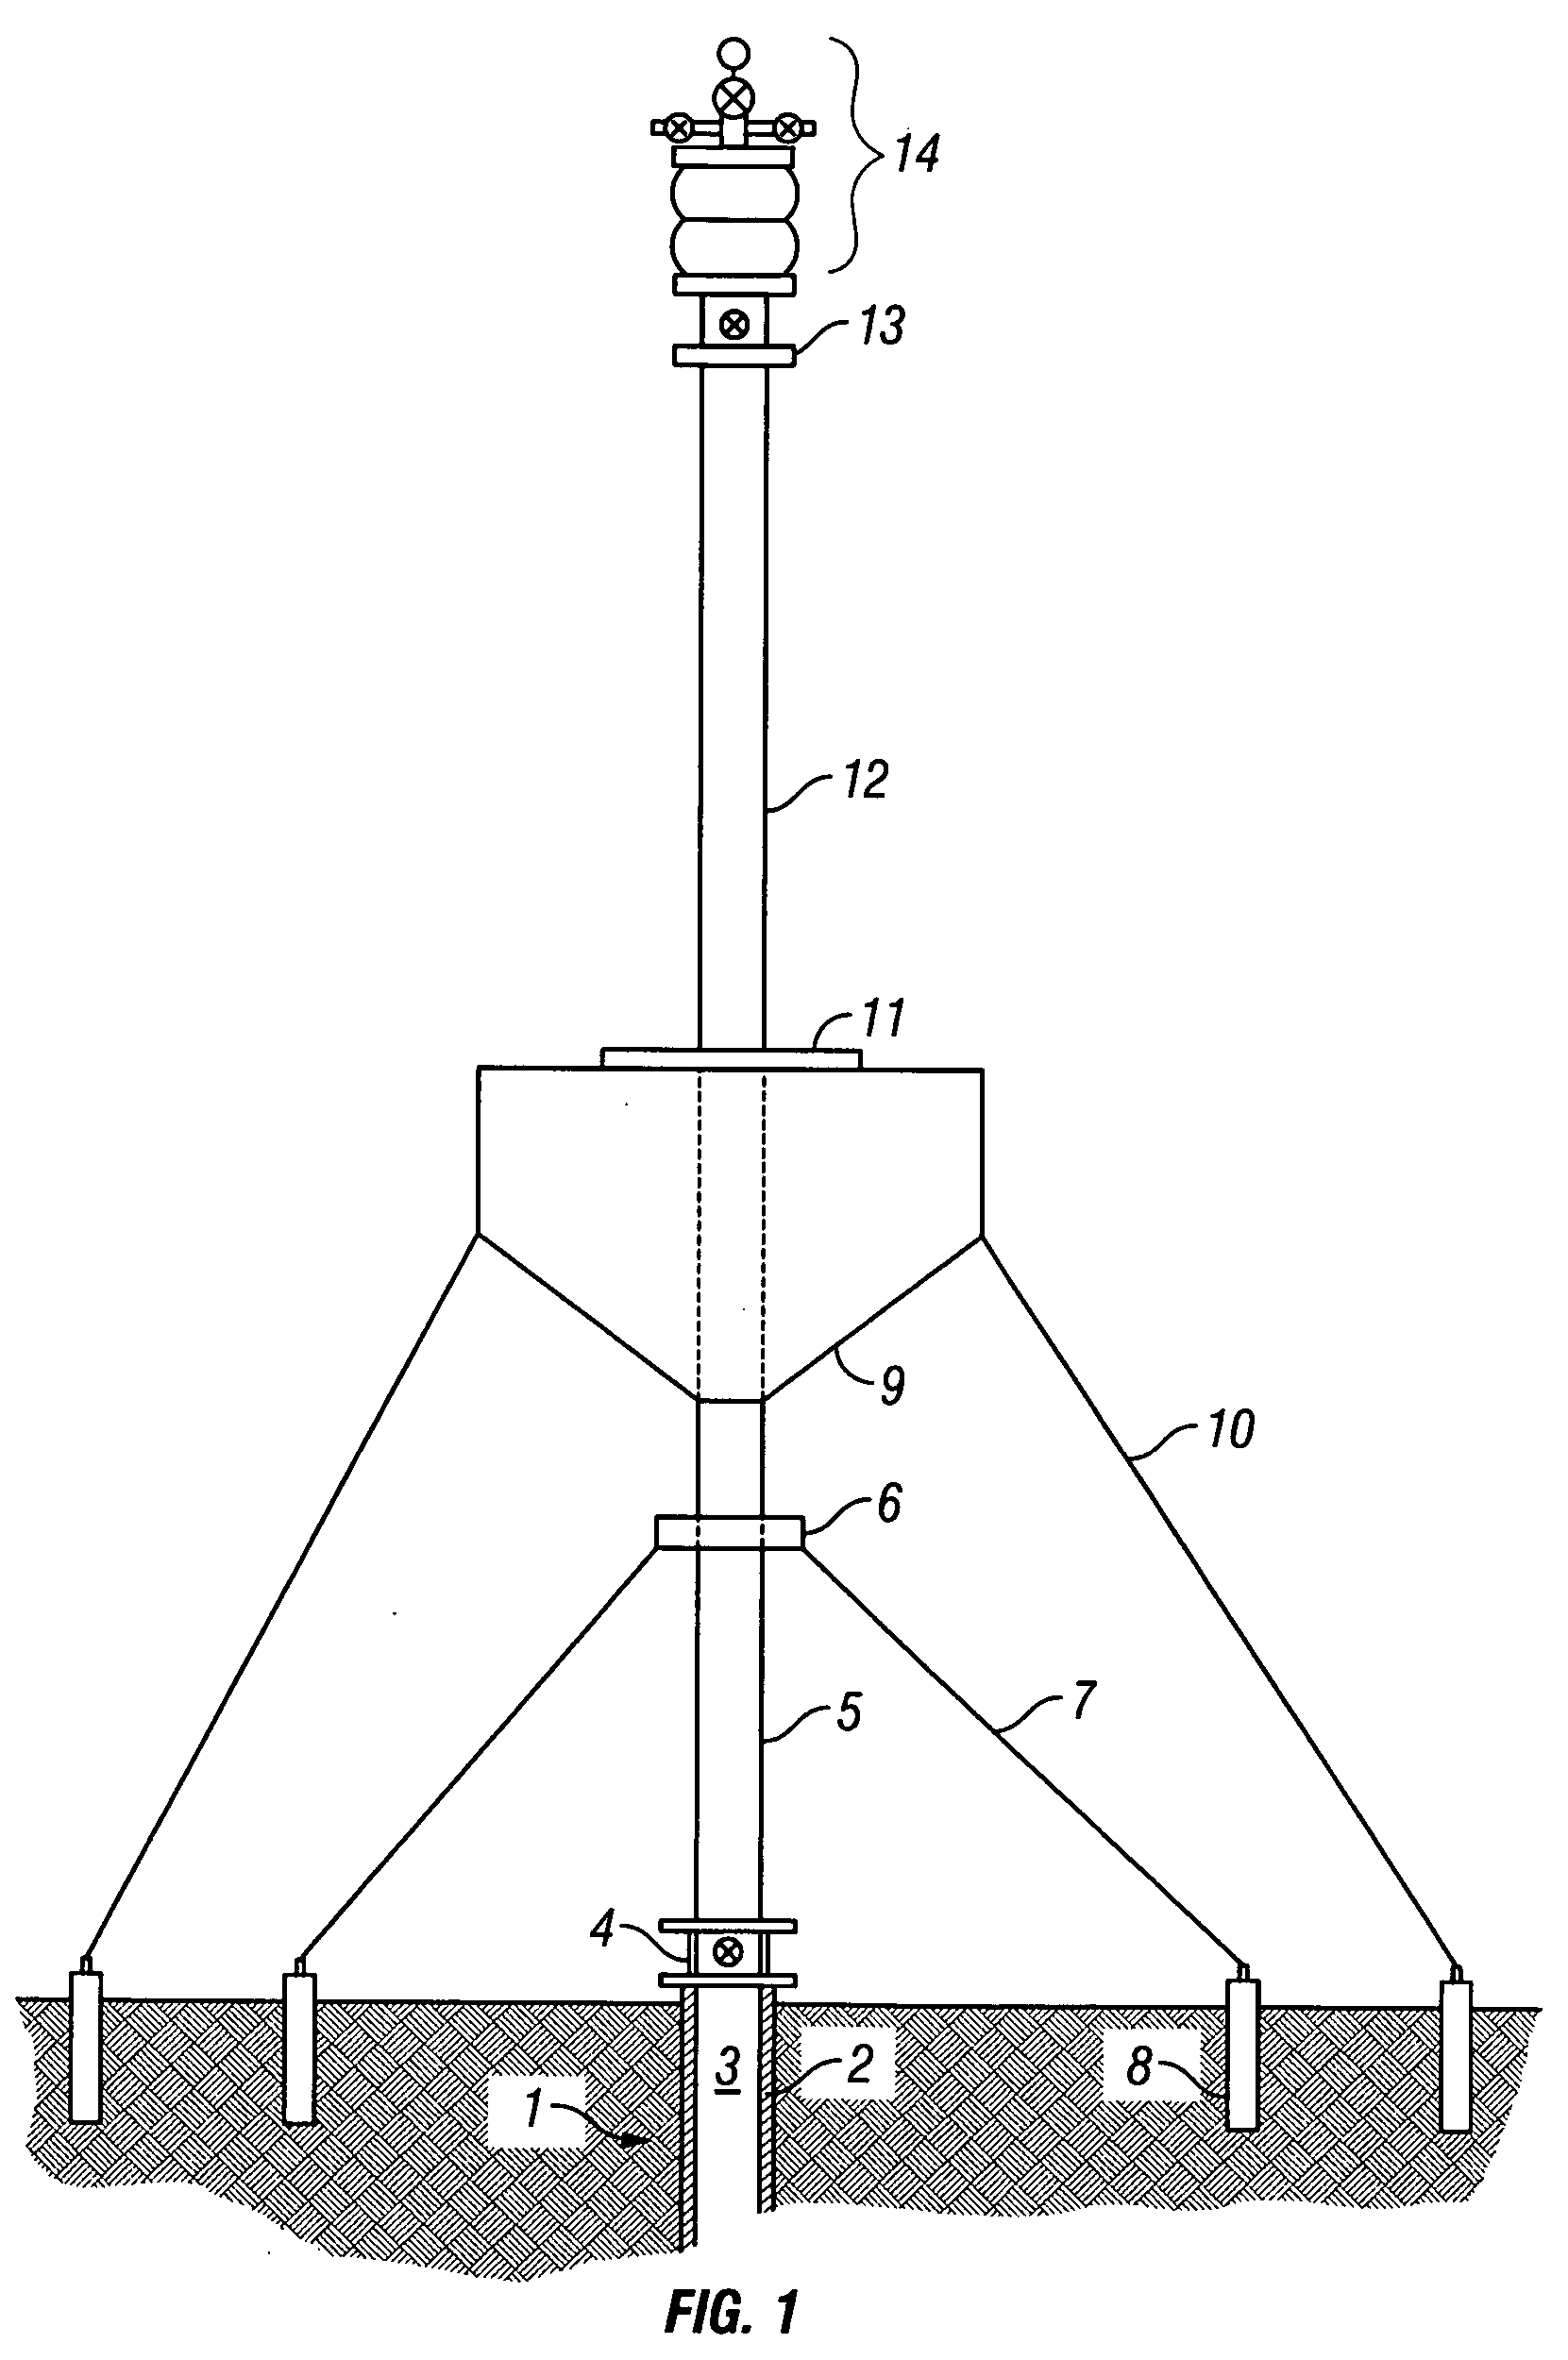 System and method of installing and maintaining an offshore exploration and production system having an adjustable buoyancy chamber